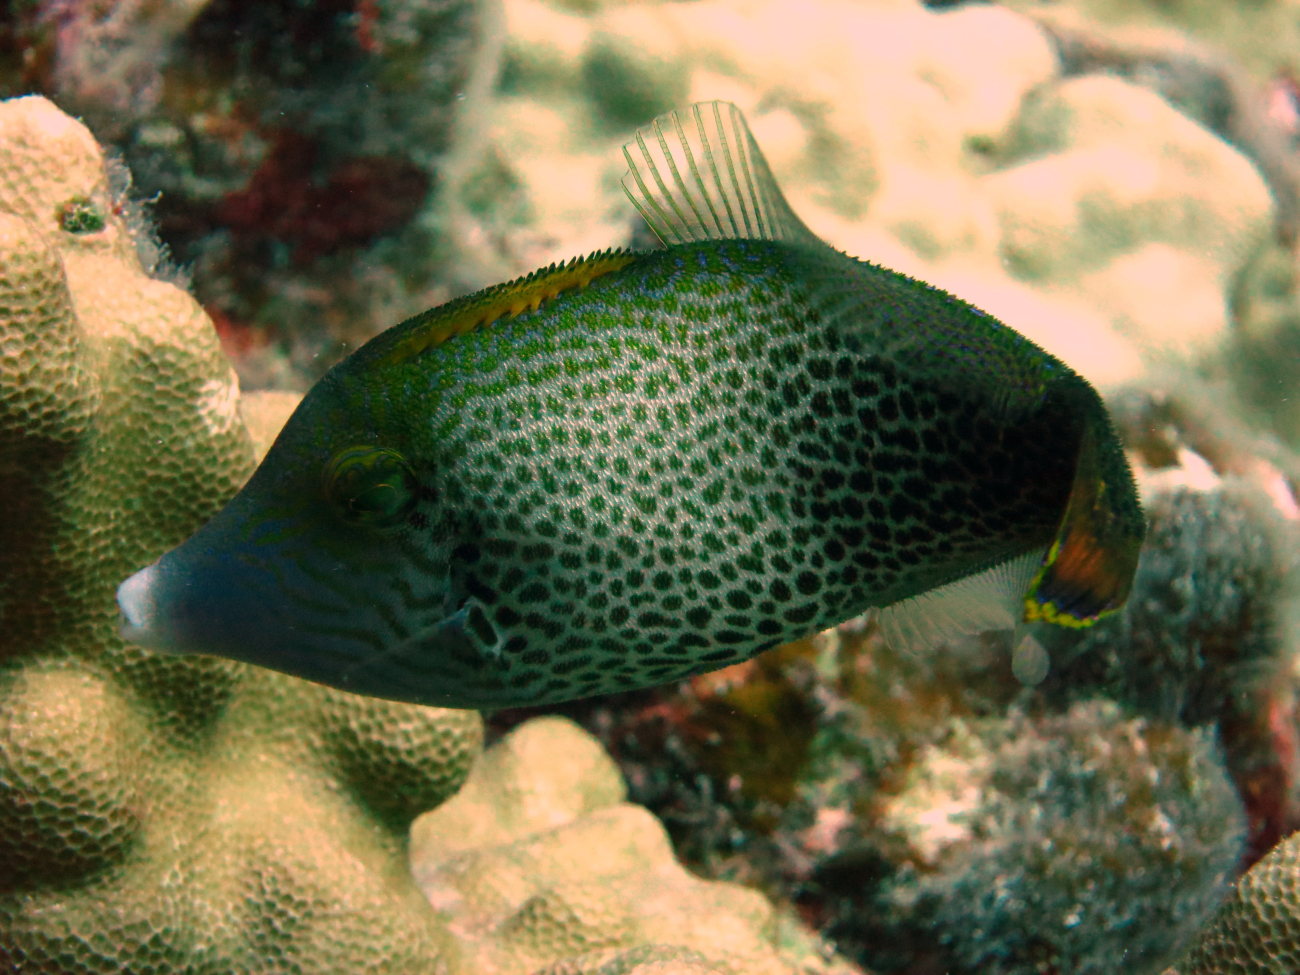 One of the many Hawaiian Fantail Filefish (Pervagor spilosoma) recruitsseen on the reef in the  Kahekili Herbivore Fisheries Management Area